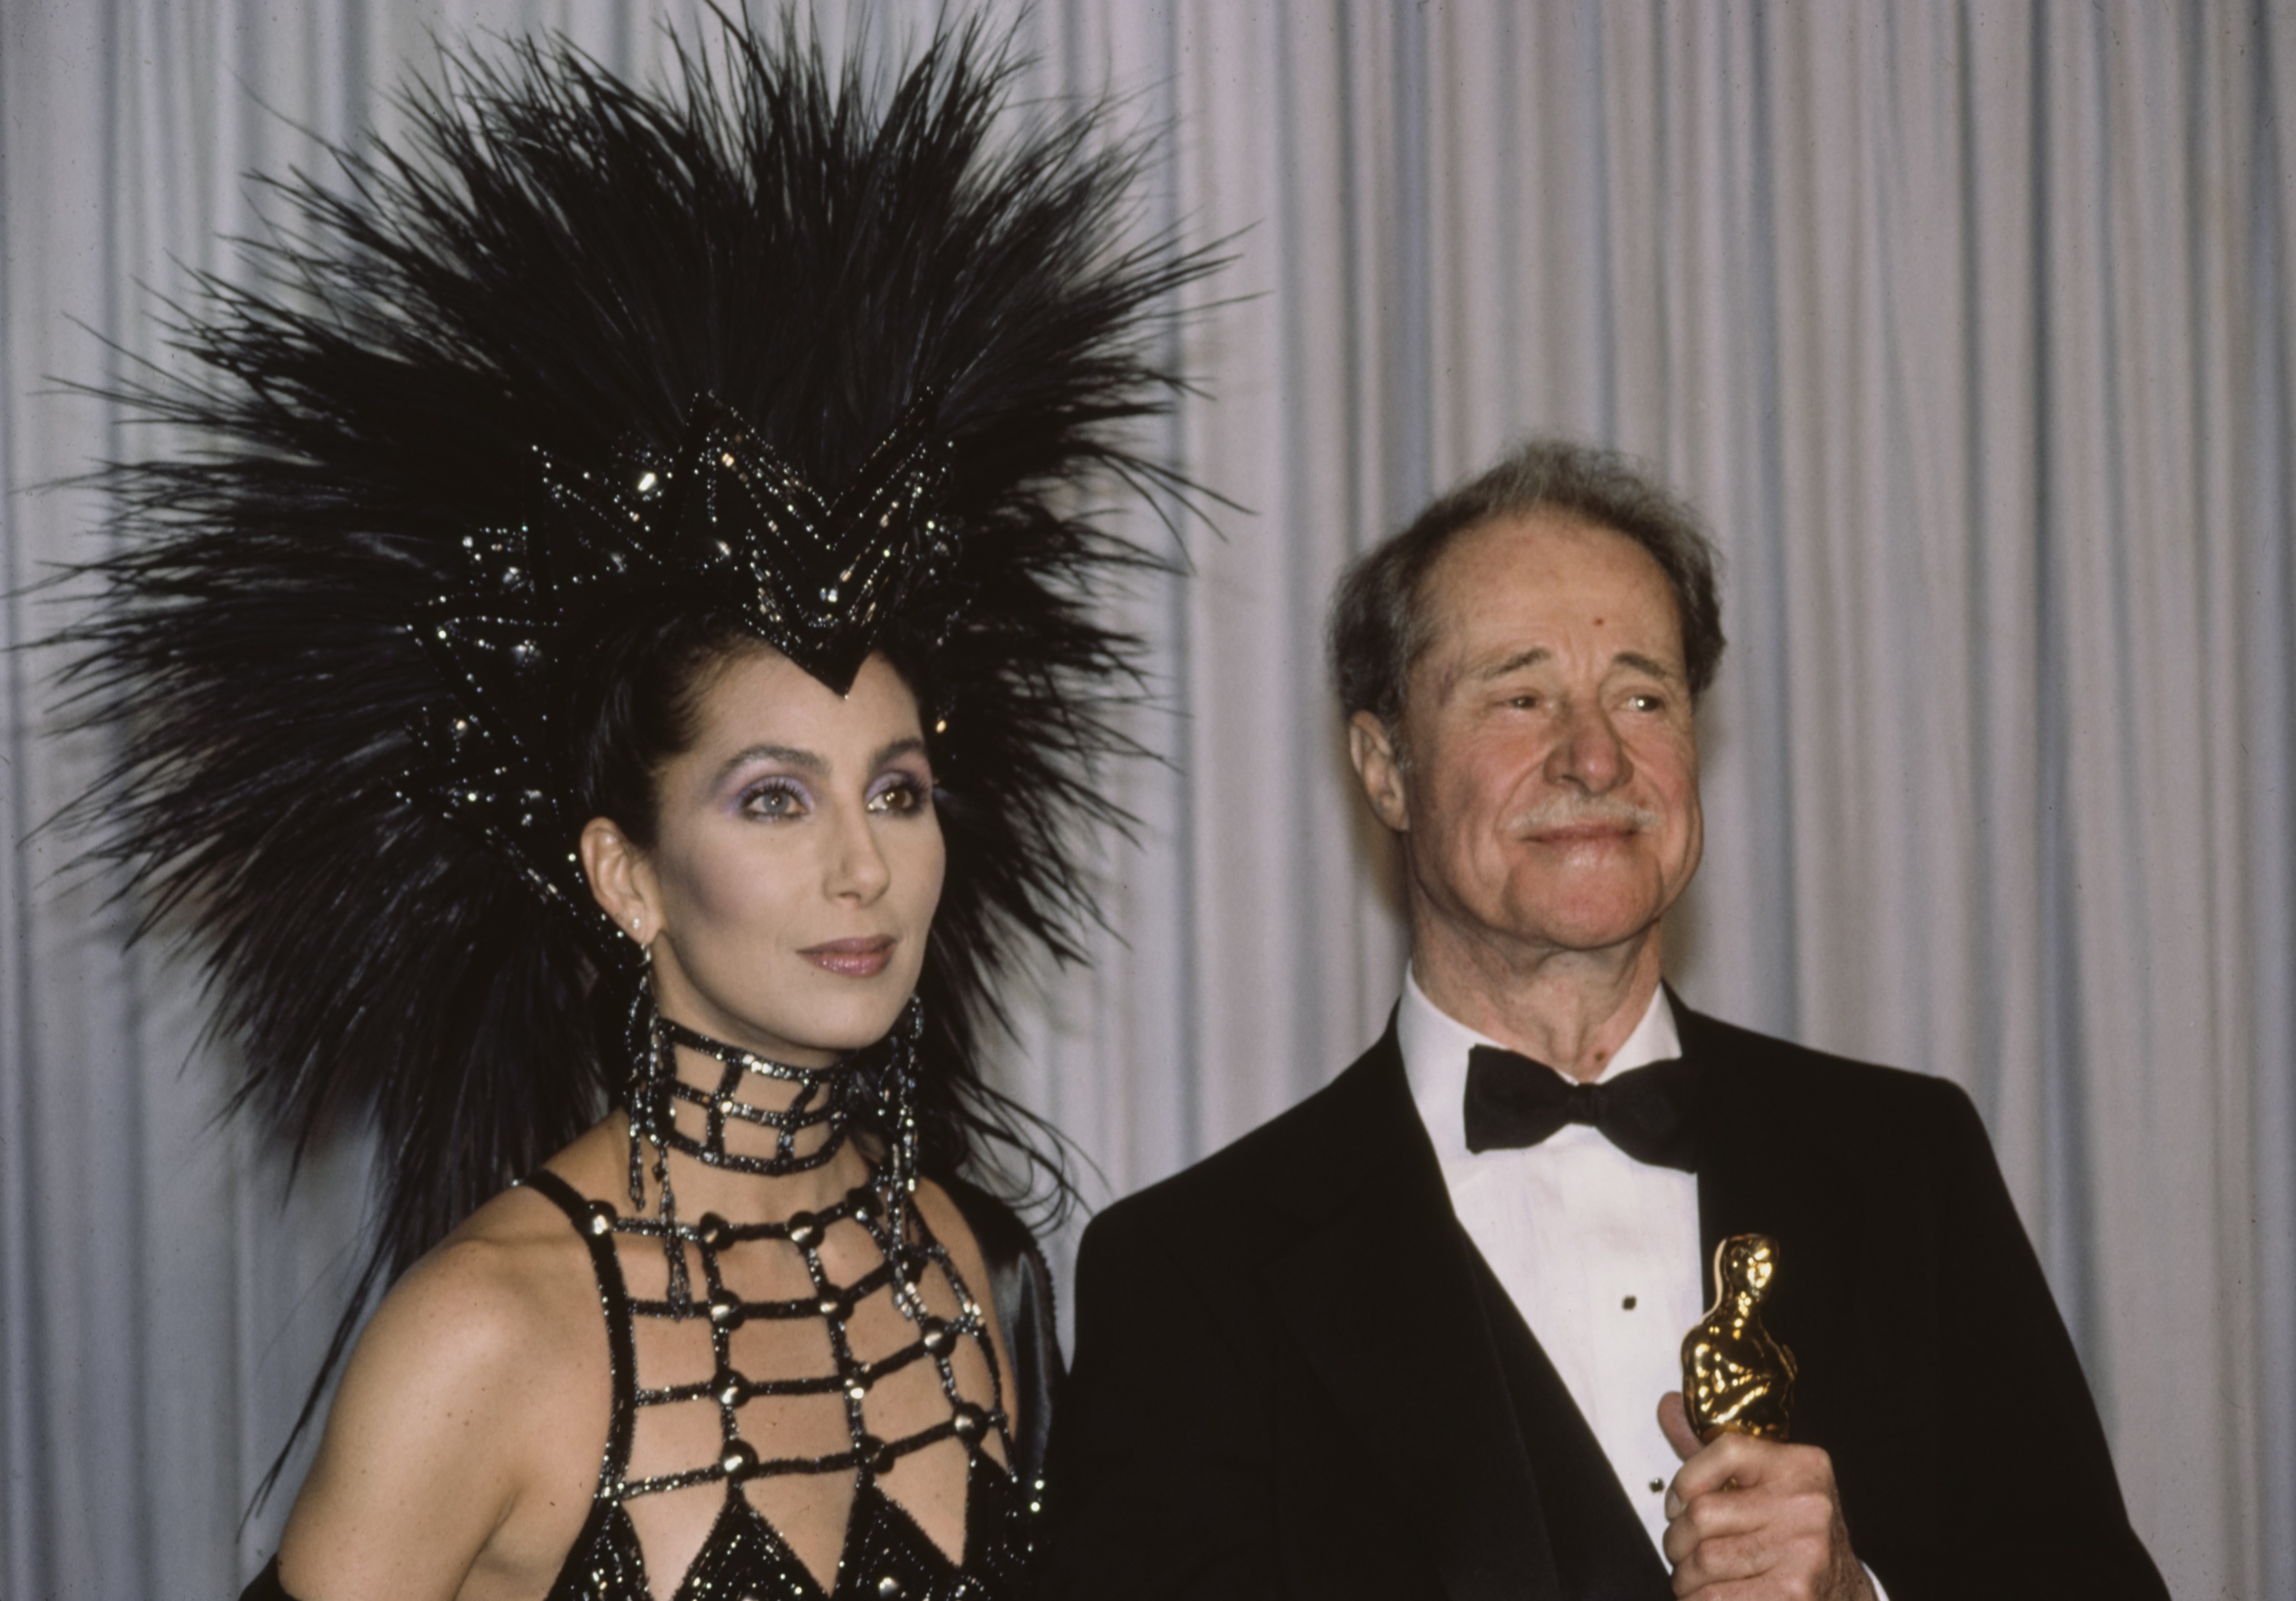 Cher and Don Ameche at the 58th Annual Academy Awards on March 24, 1986, in Los Angeles, California. | Source: Getty Images